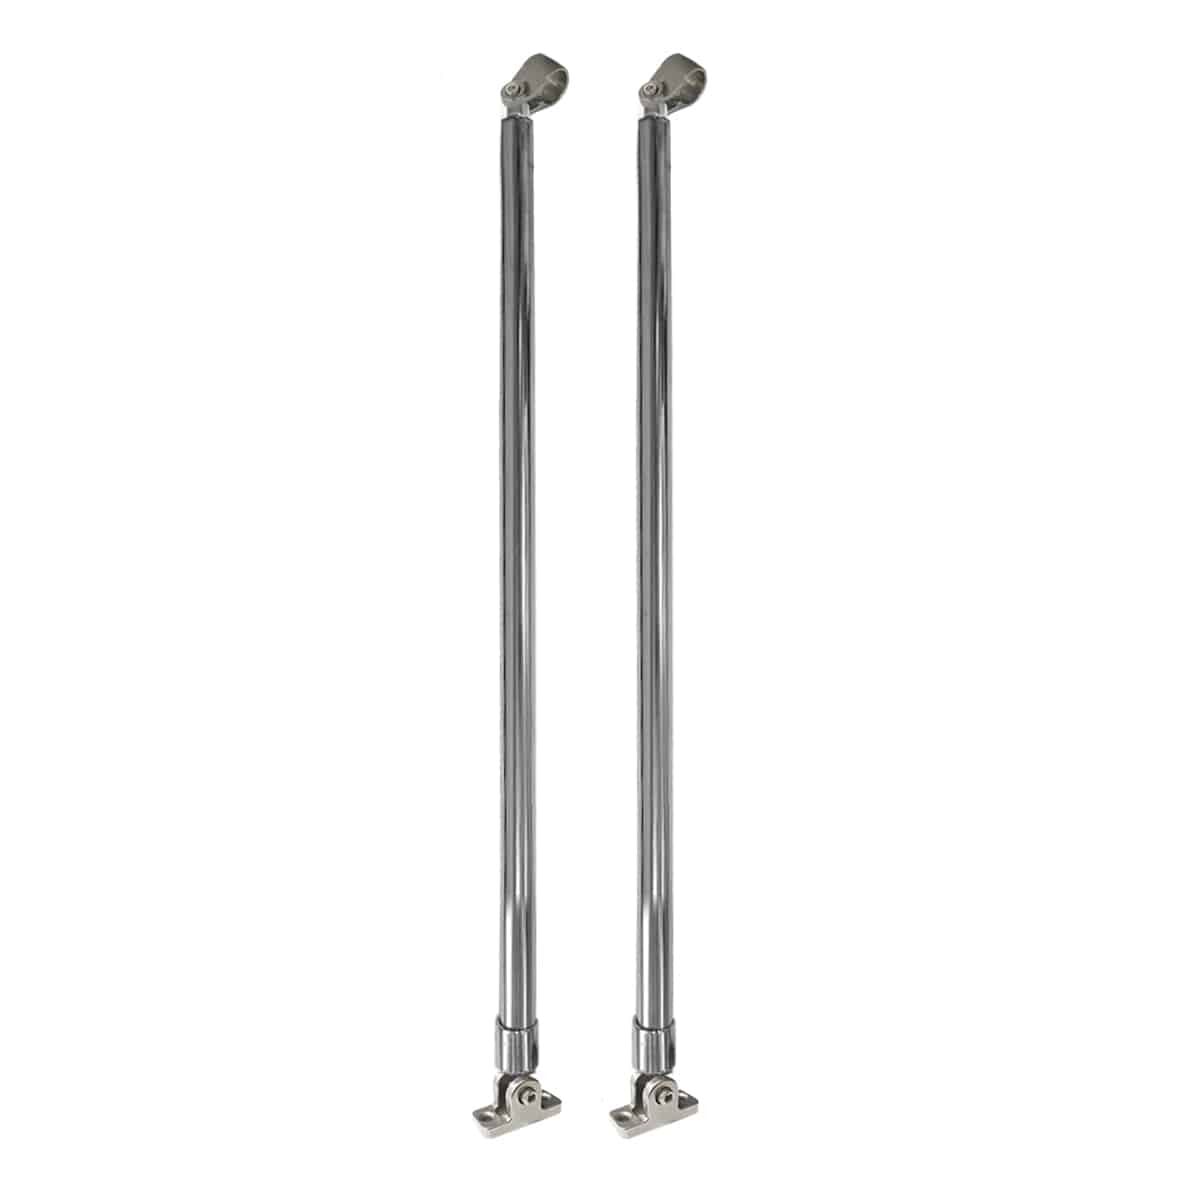 Stainless Steel Bimini Top Support Poles